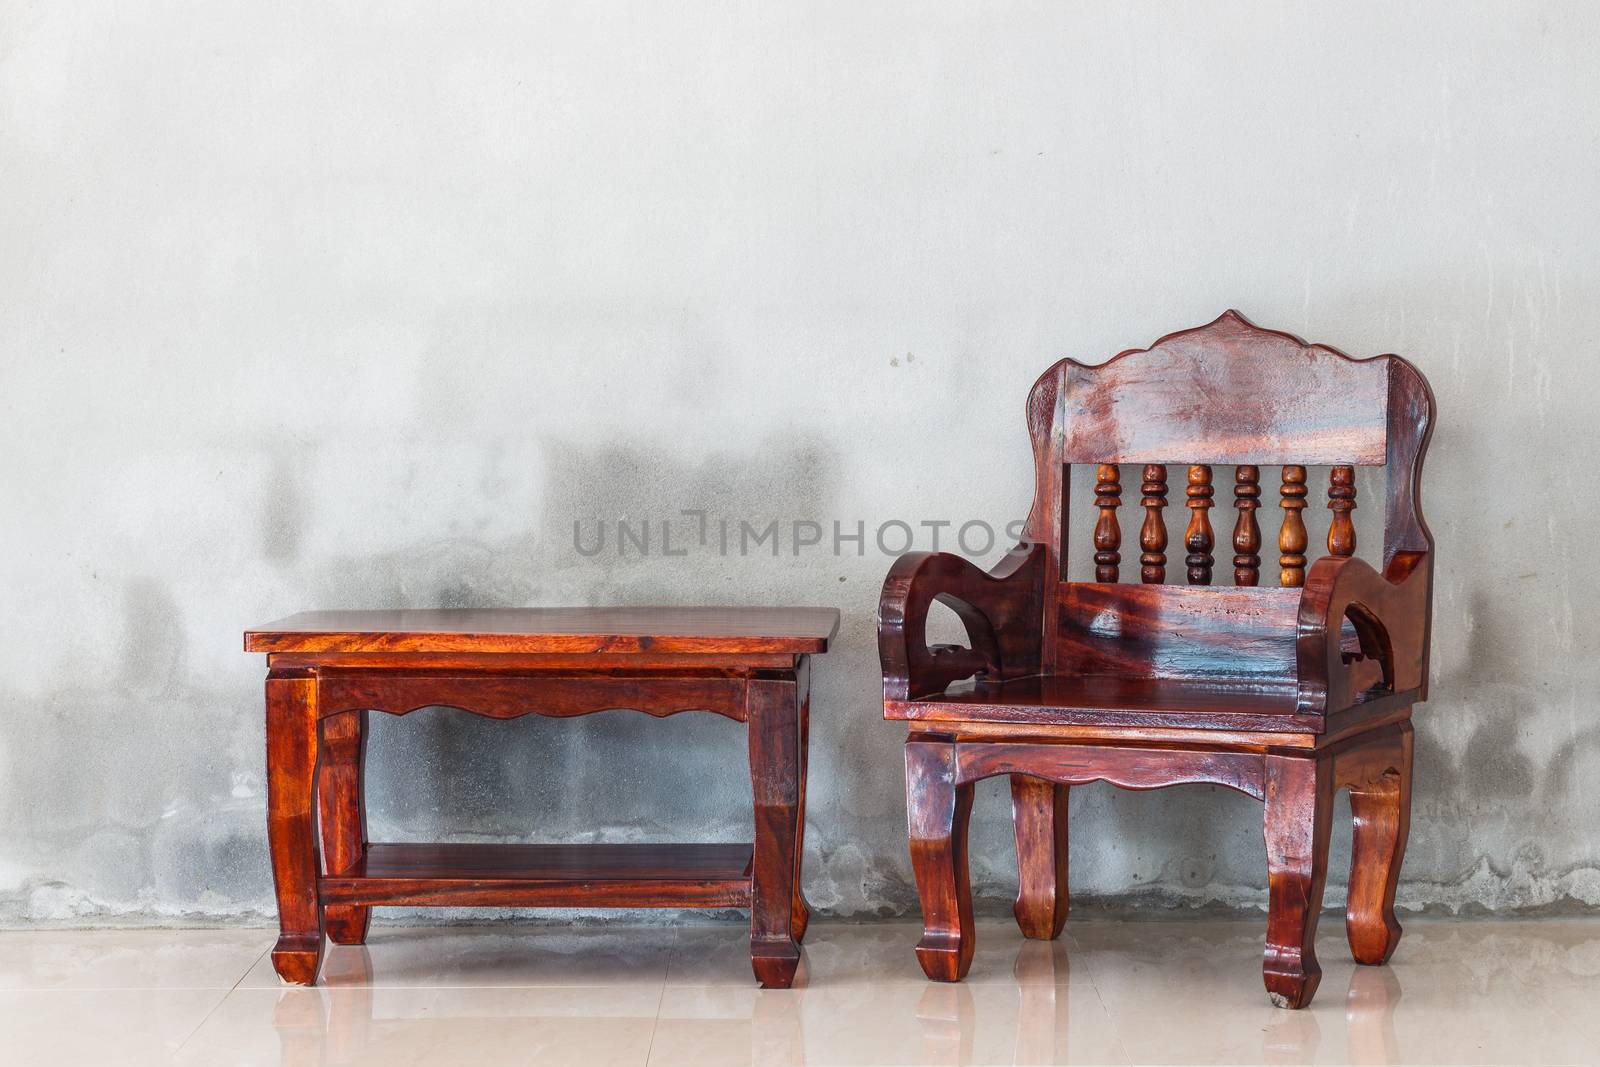 wood chair and table furniture and grunge concrete background by blackzheep